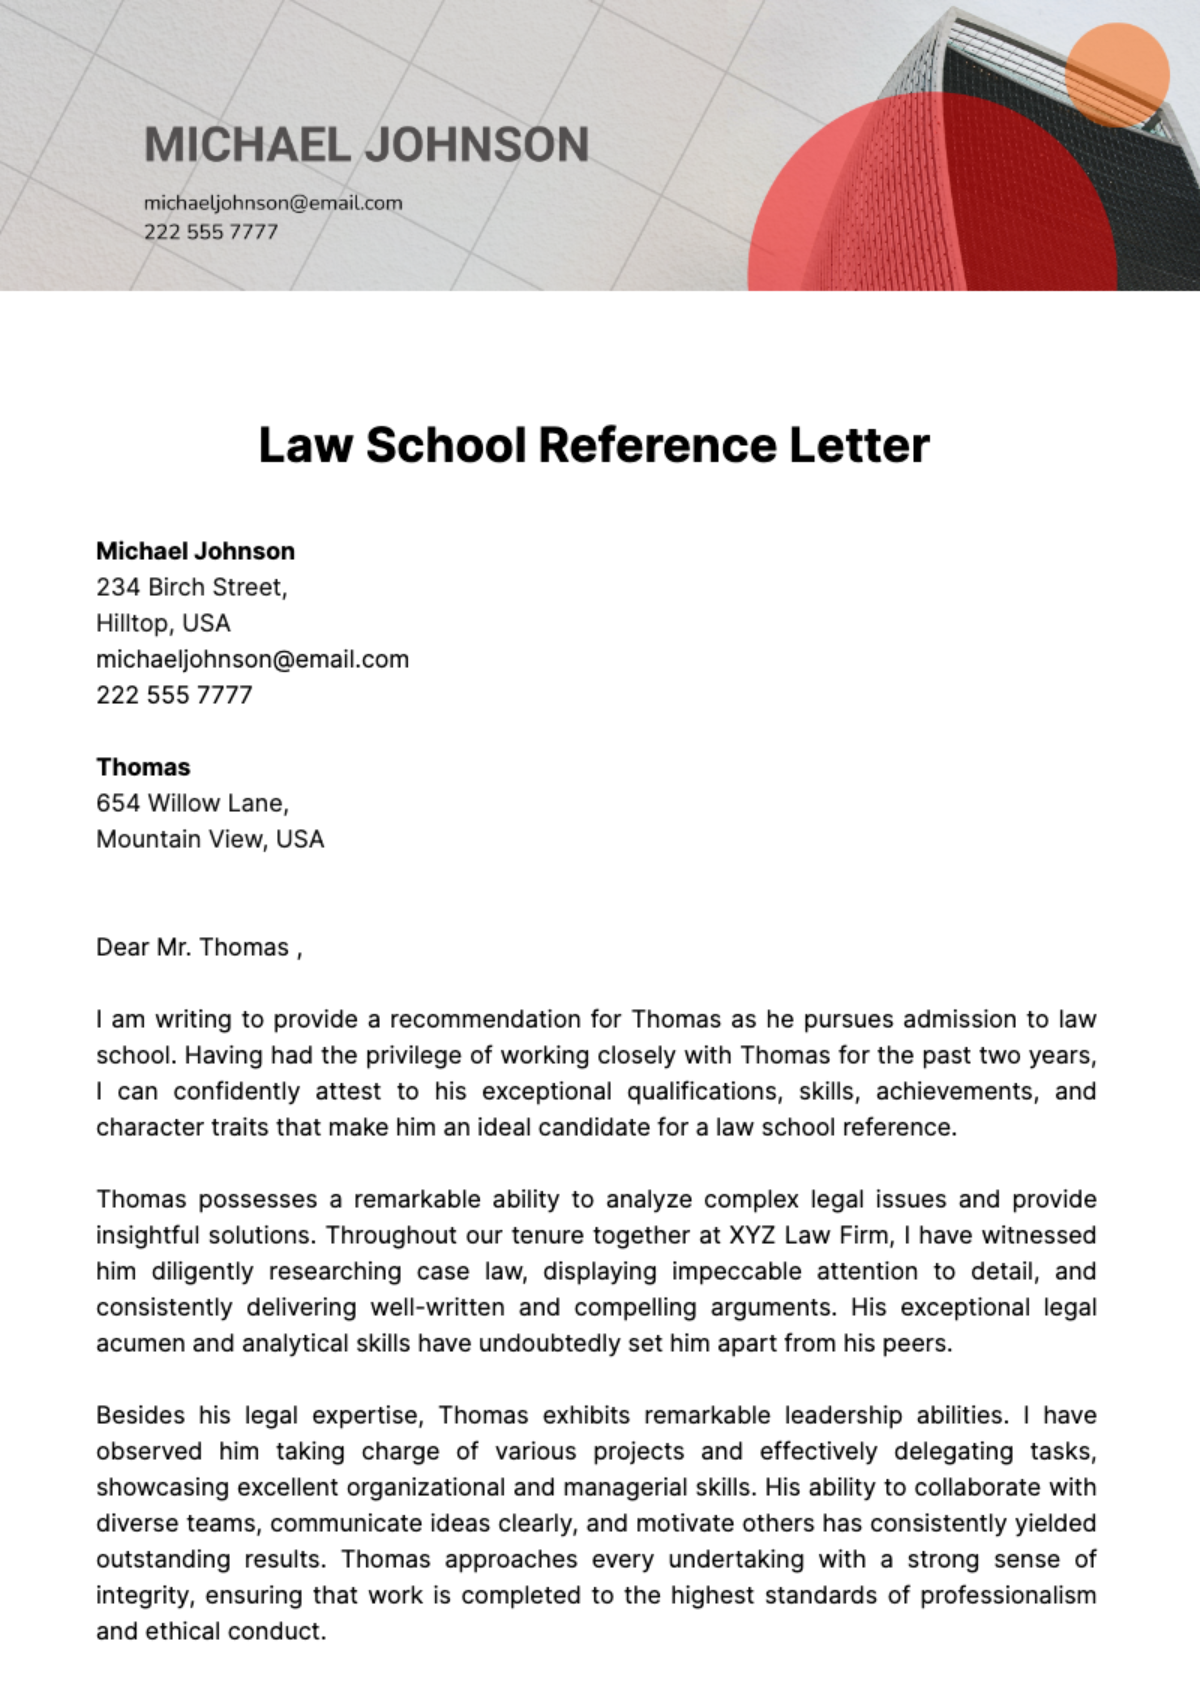 Free Law School Reference Letter Template